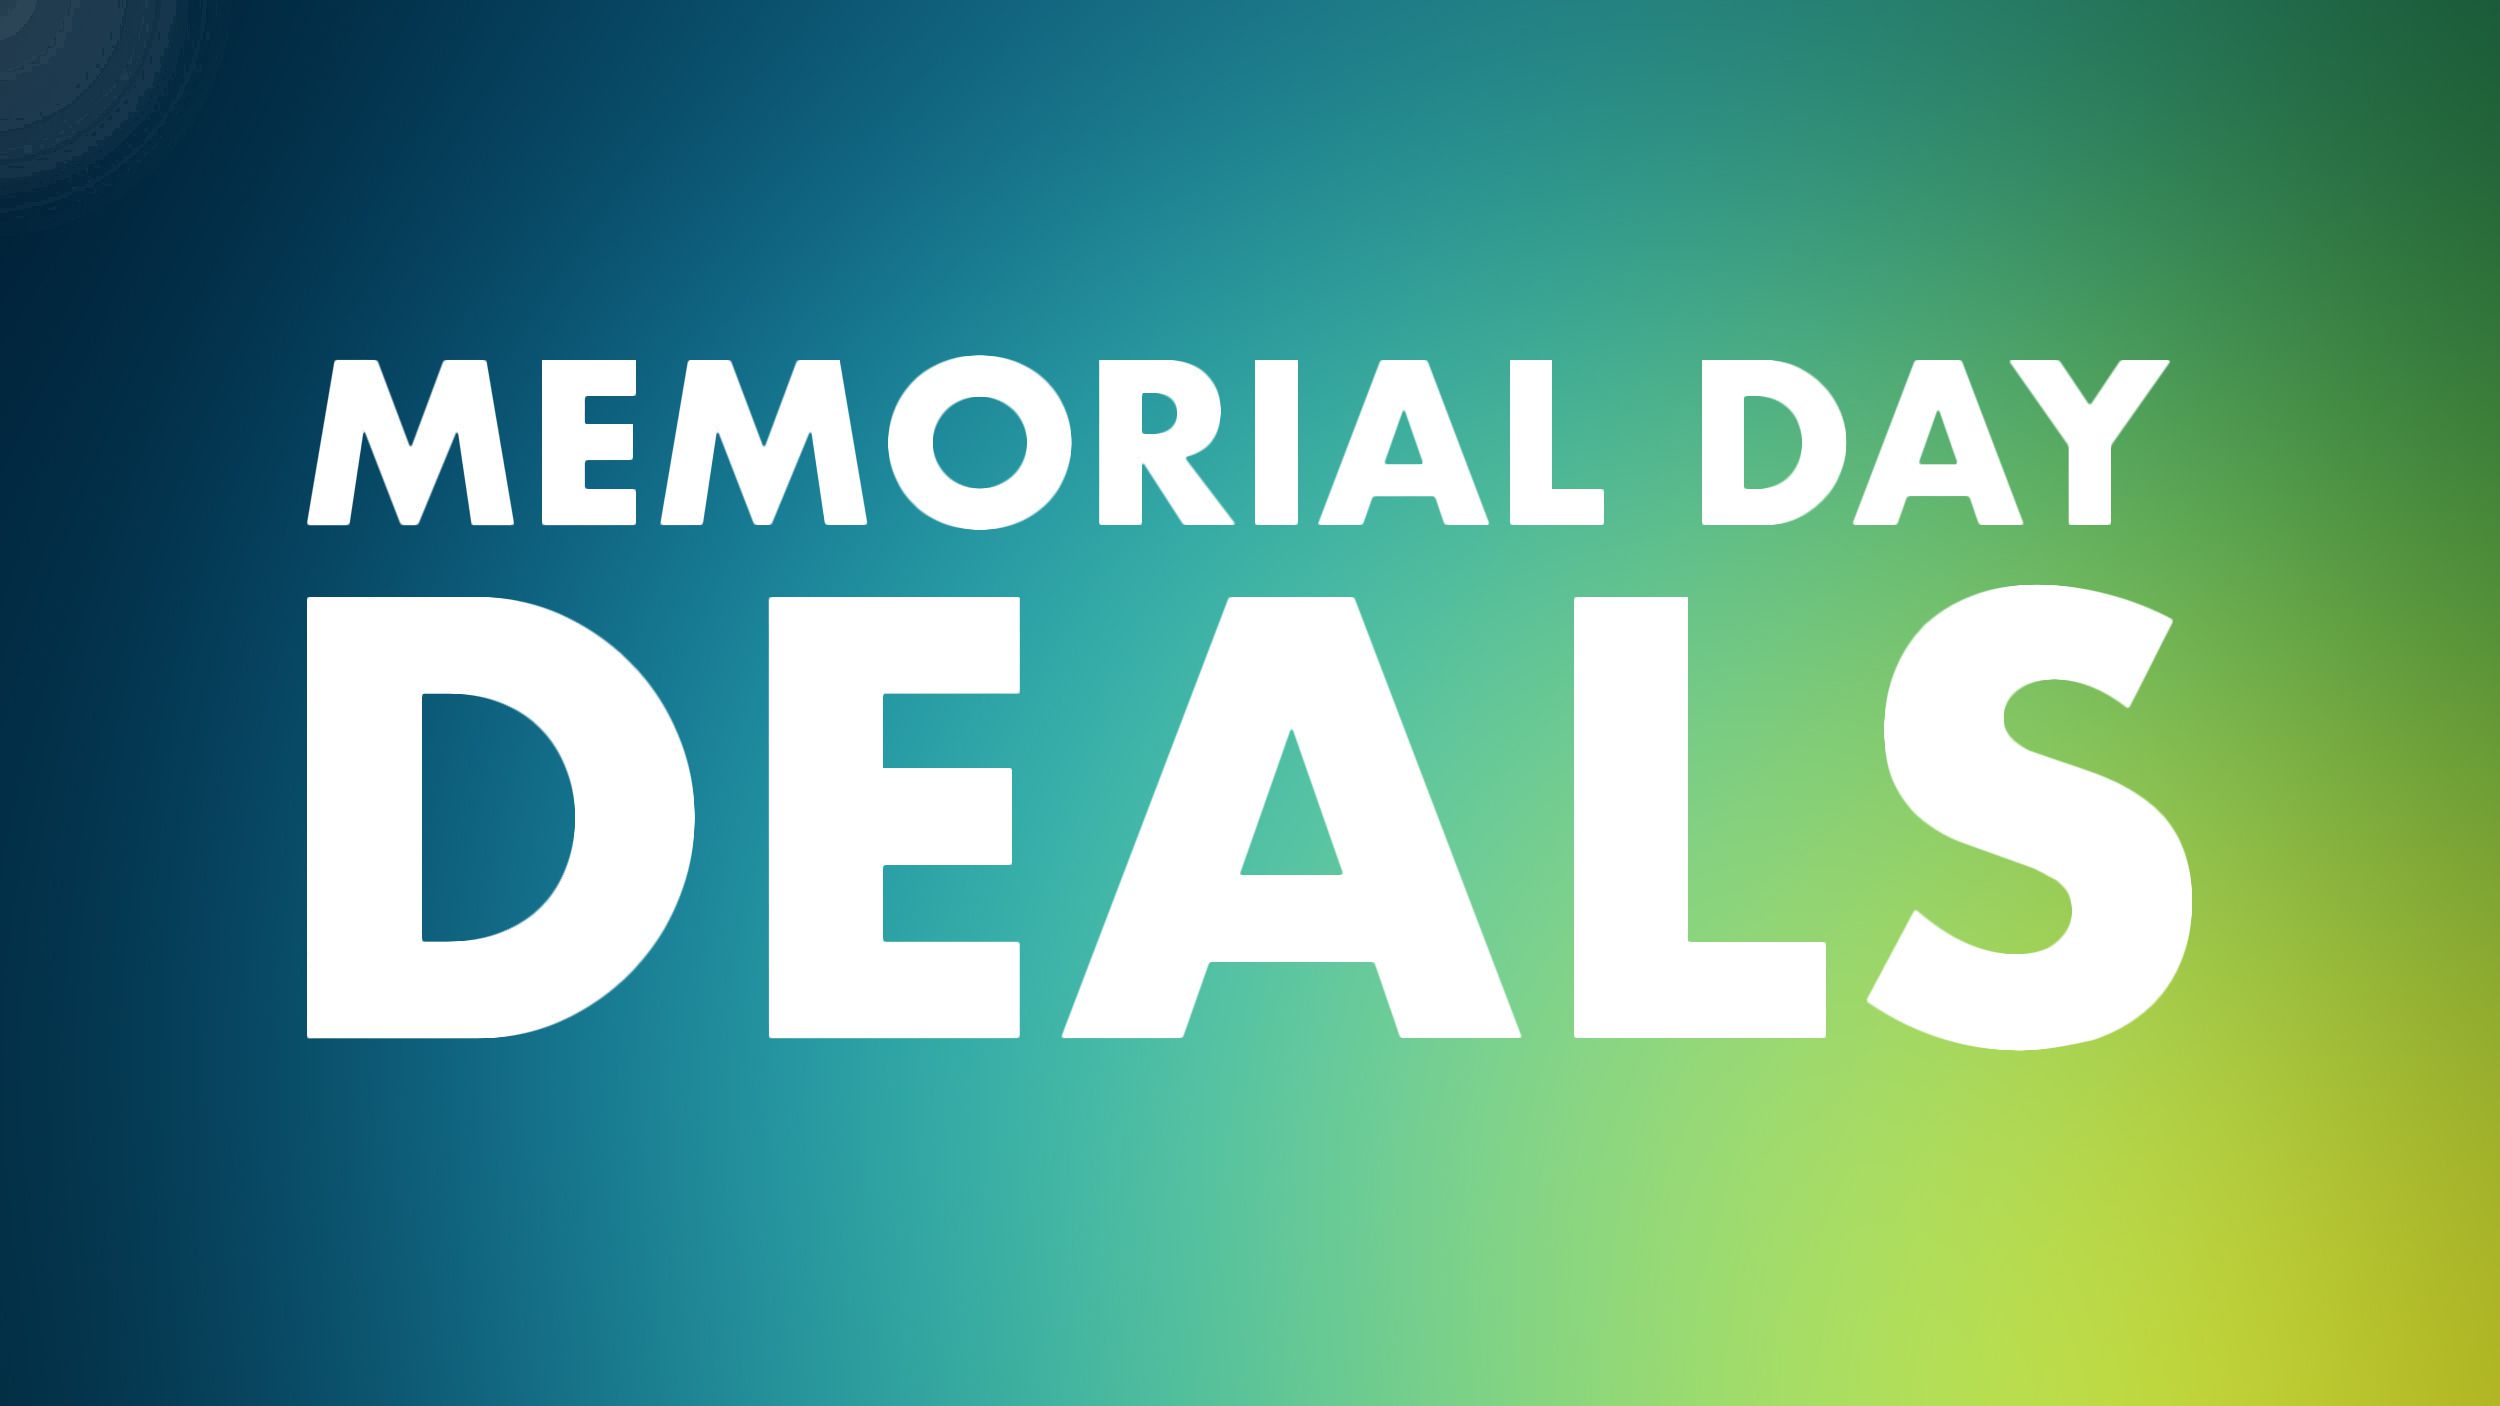 The best Memorial Day deals on Apple products, including AirPods, MacBook Pro, and more